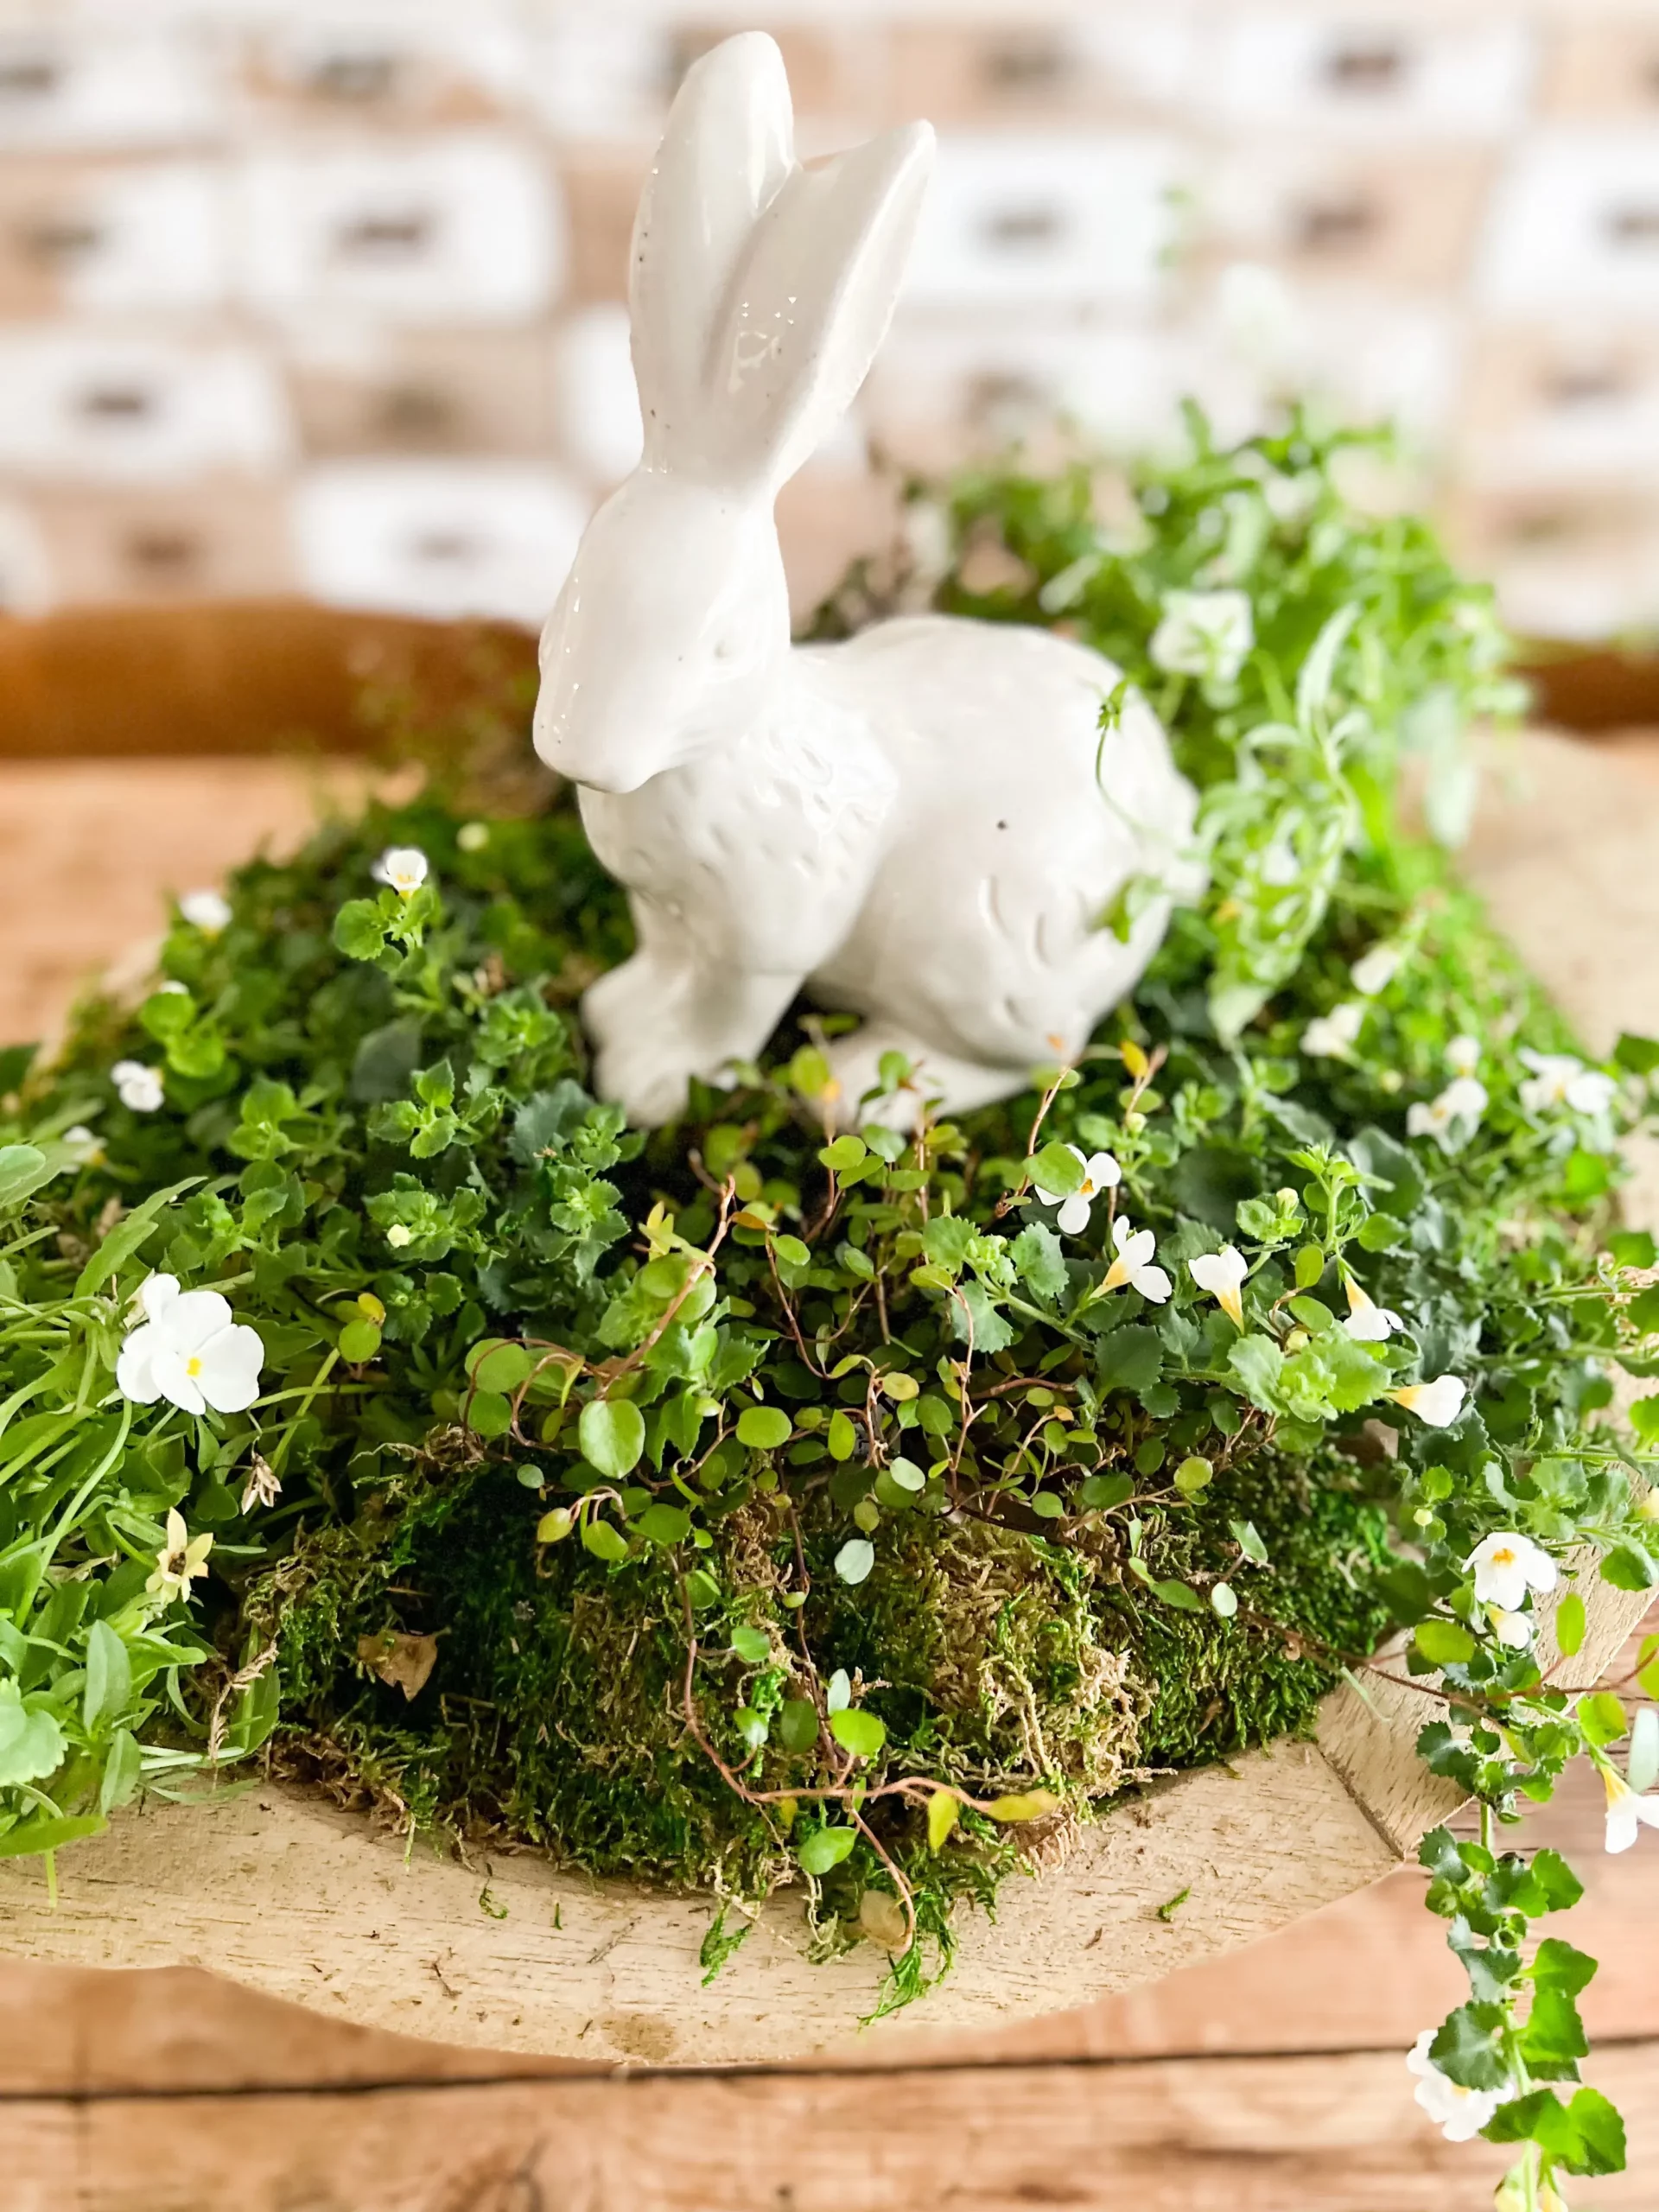 adorable white bunny on top of a wooden bowl with greenery and small white flowers